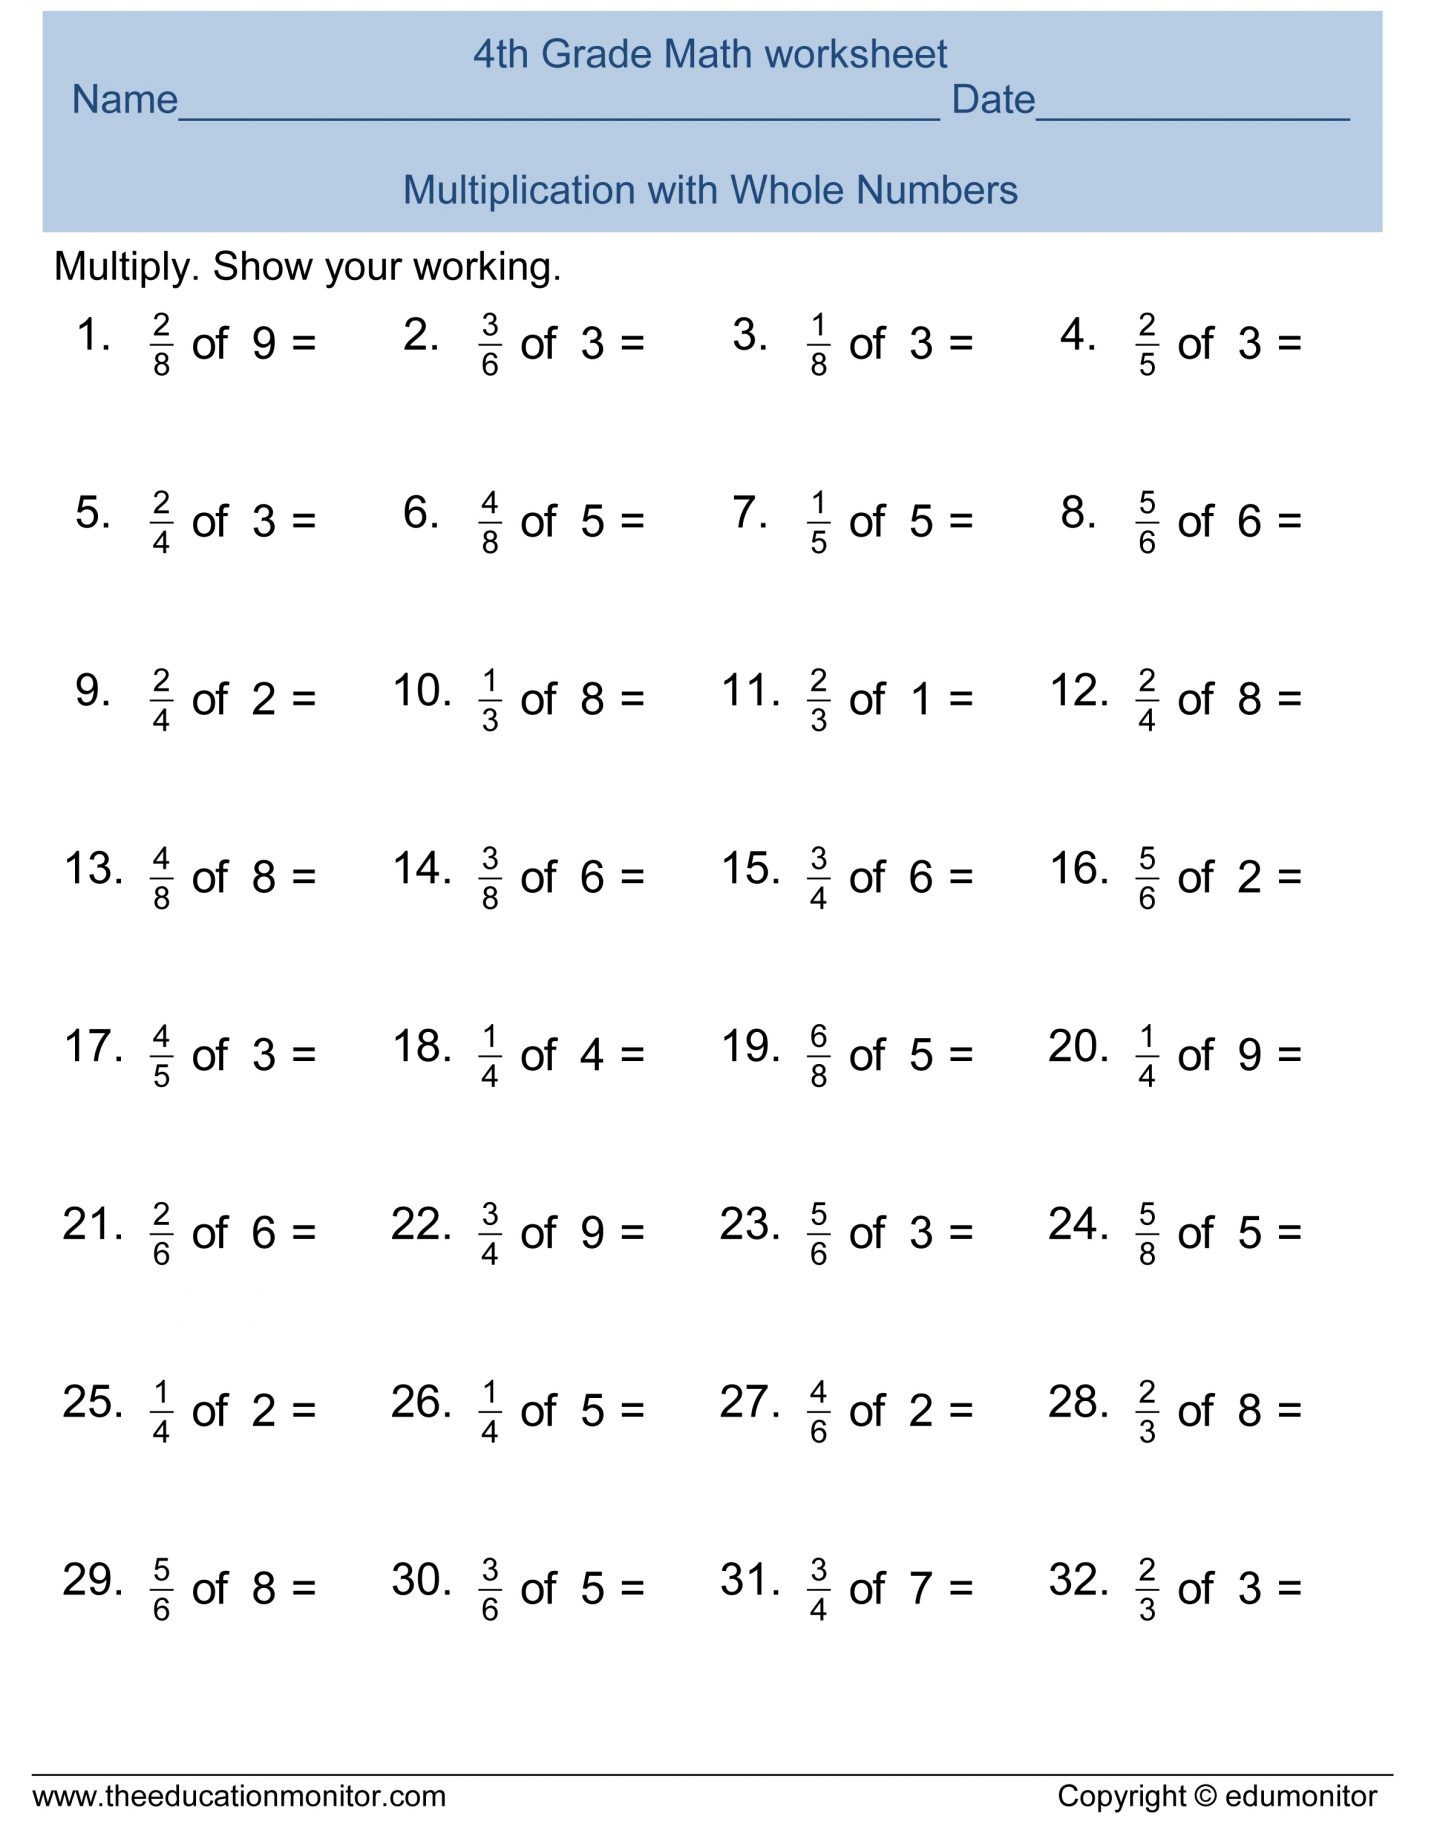 7Th Grade Math Worksheets Free Printable With Answers Stunning - 7Th | 7Th Grade Worksheets Free Printable